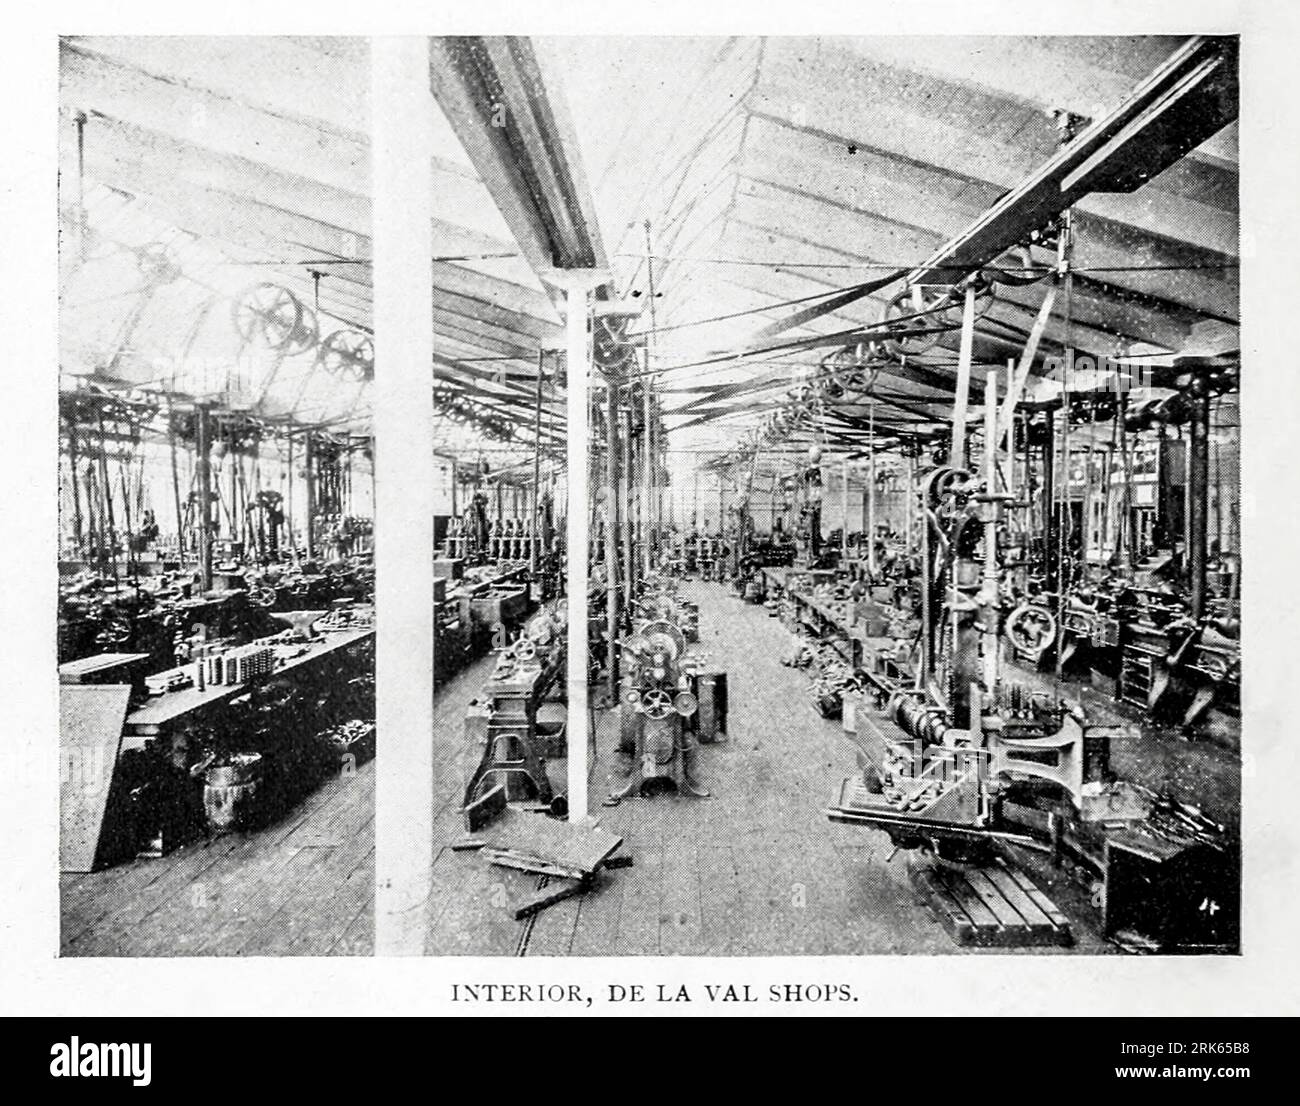 Interior De La Val Shops Poughkeepsie NY from the Article MODERN MACHINE-SHOP ECONOMICS PRIME REQUISITES OF SHOP CONSTRUCTION By Horace L. Arnold from The Engineering Magazine DEVOTED TO INDUSTRIAL PROGRESS Volume XI October 1896 NEW YORK The Engineering Magazine Co Stock Photo